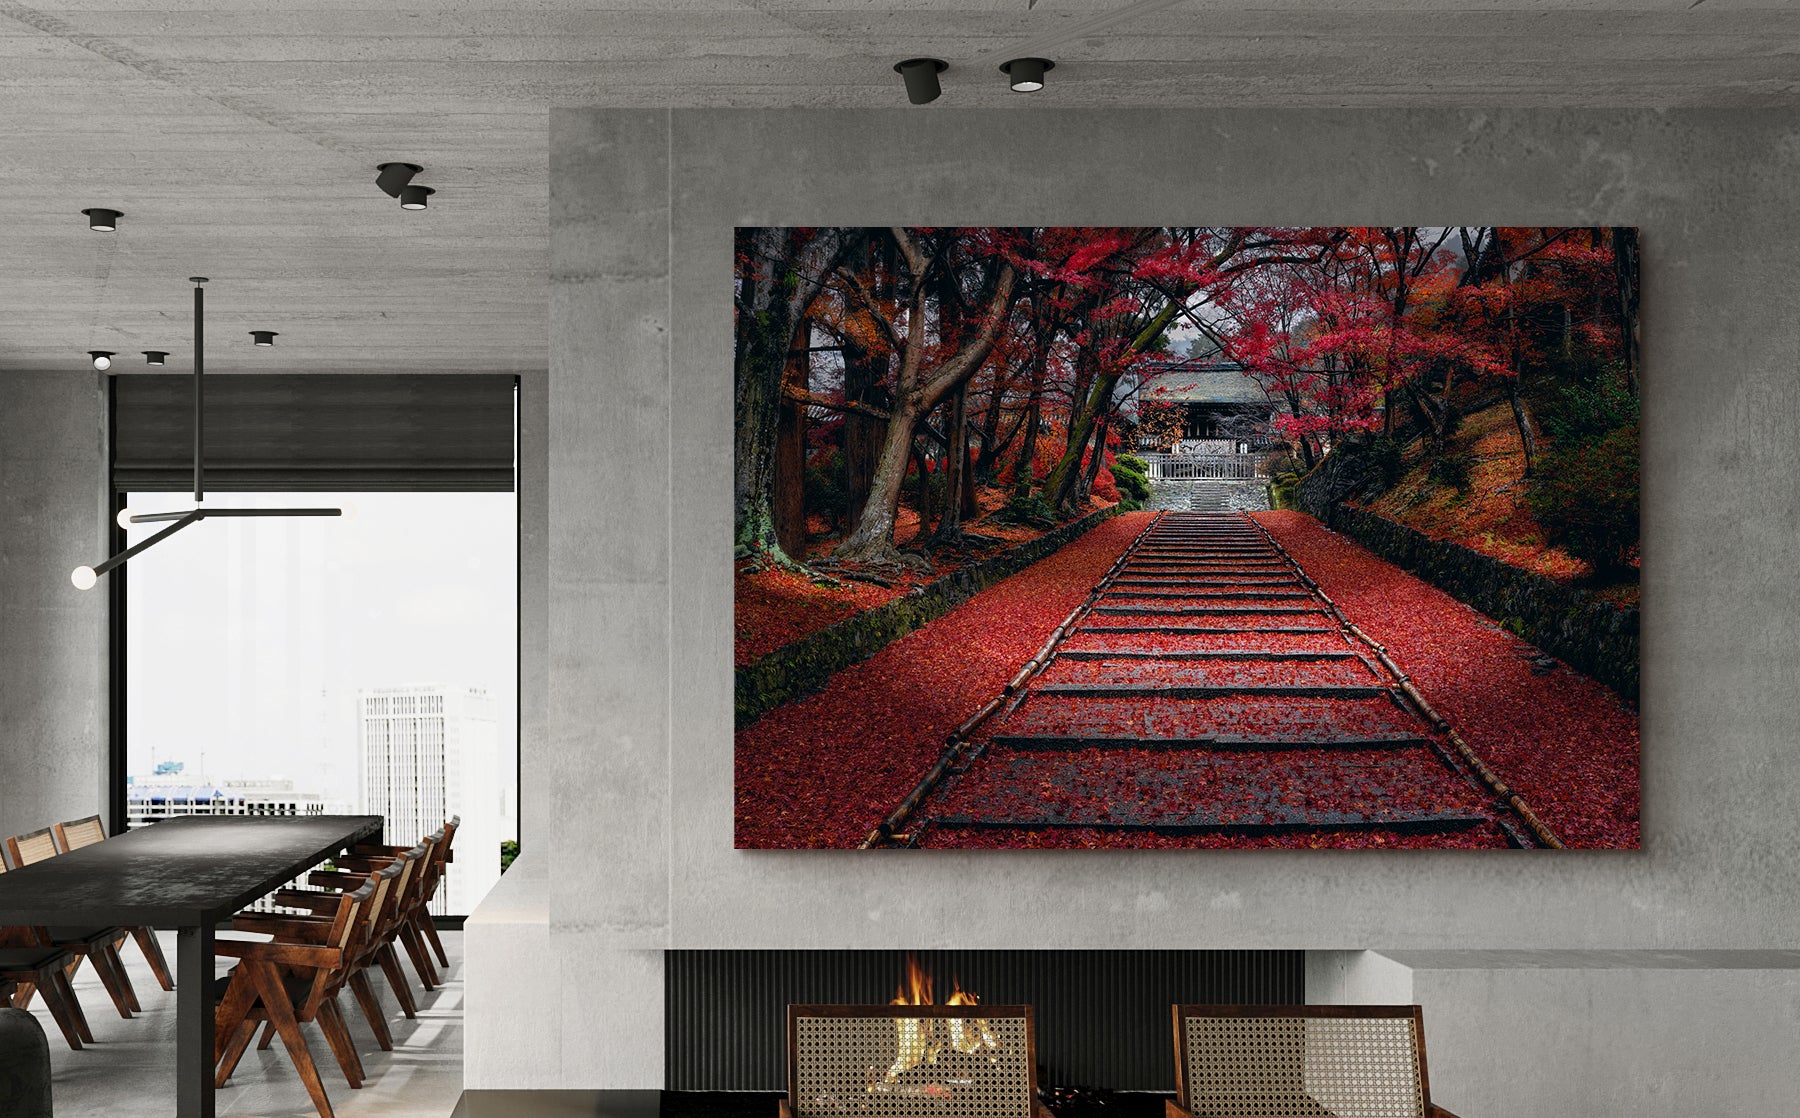 Large Peter Lik photograph of red leaves along a pathway hanging on a large concrete wall above a fireplace 